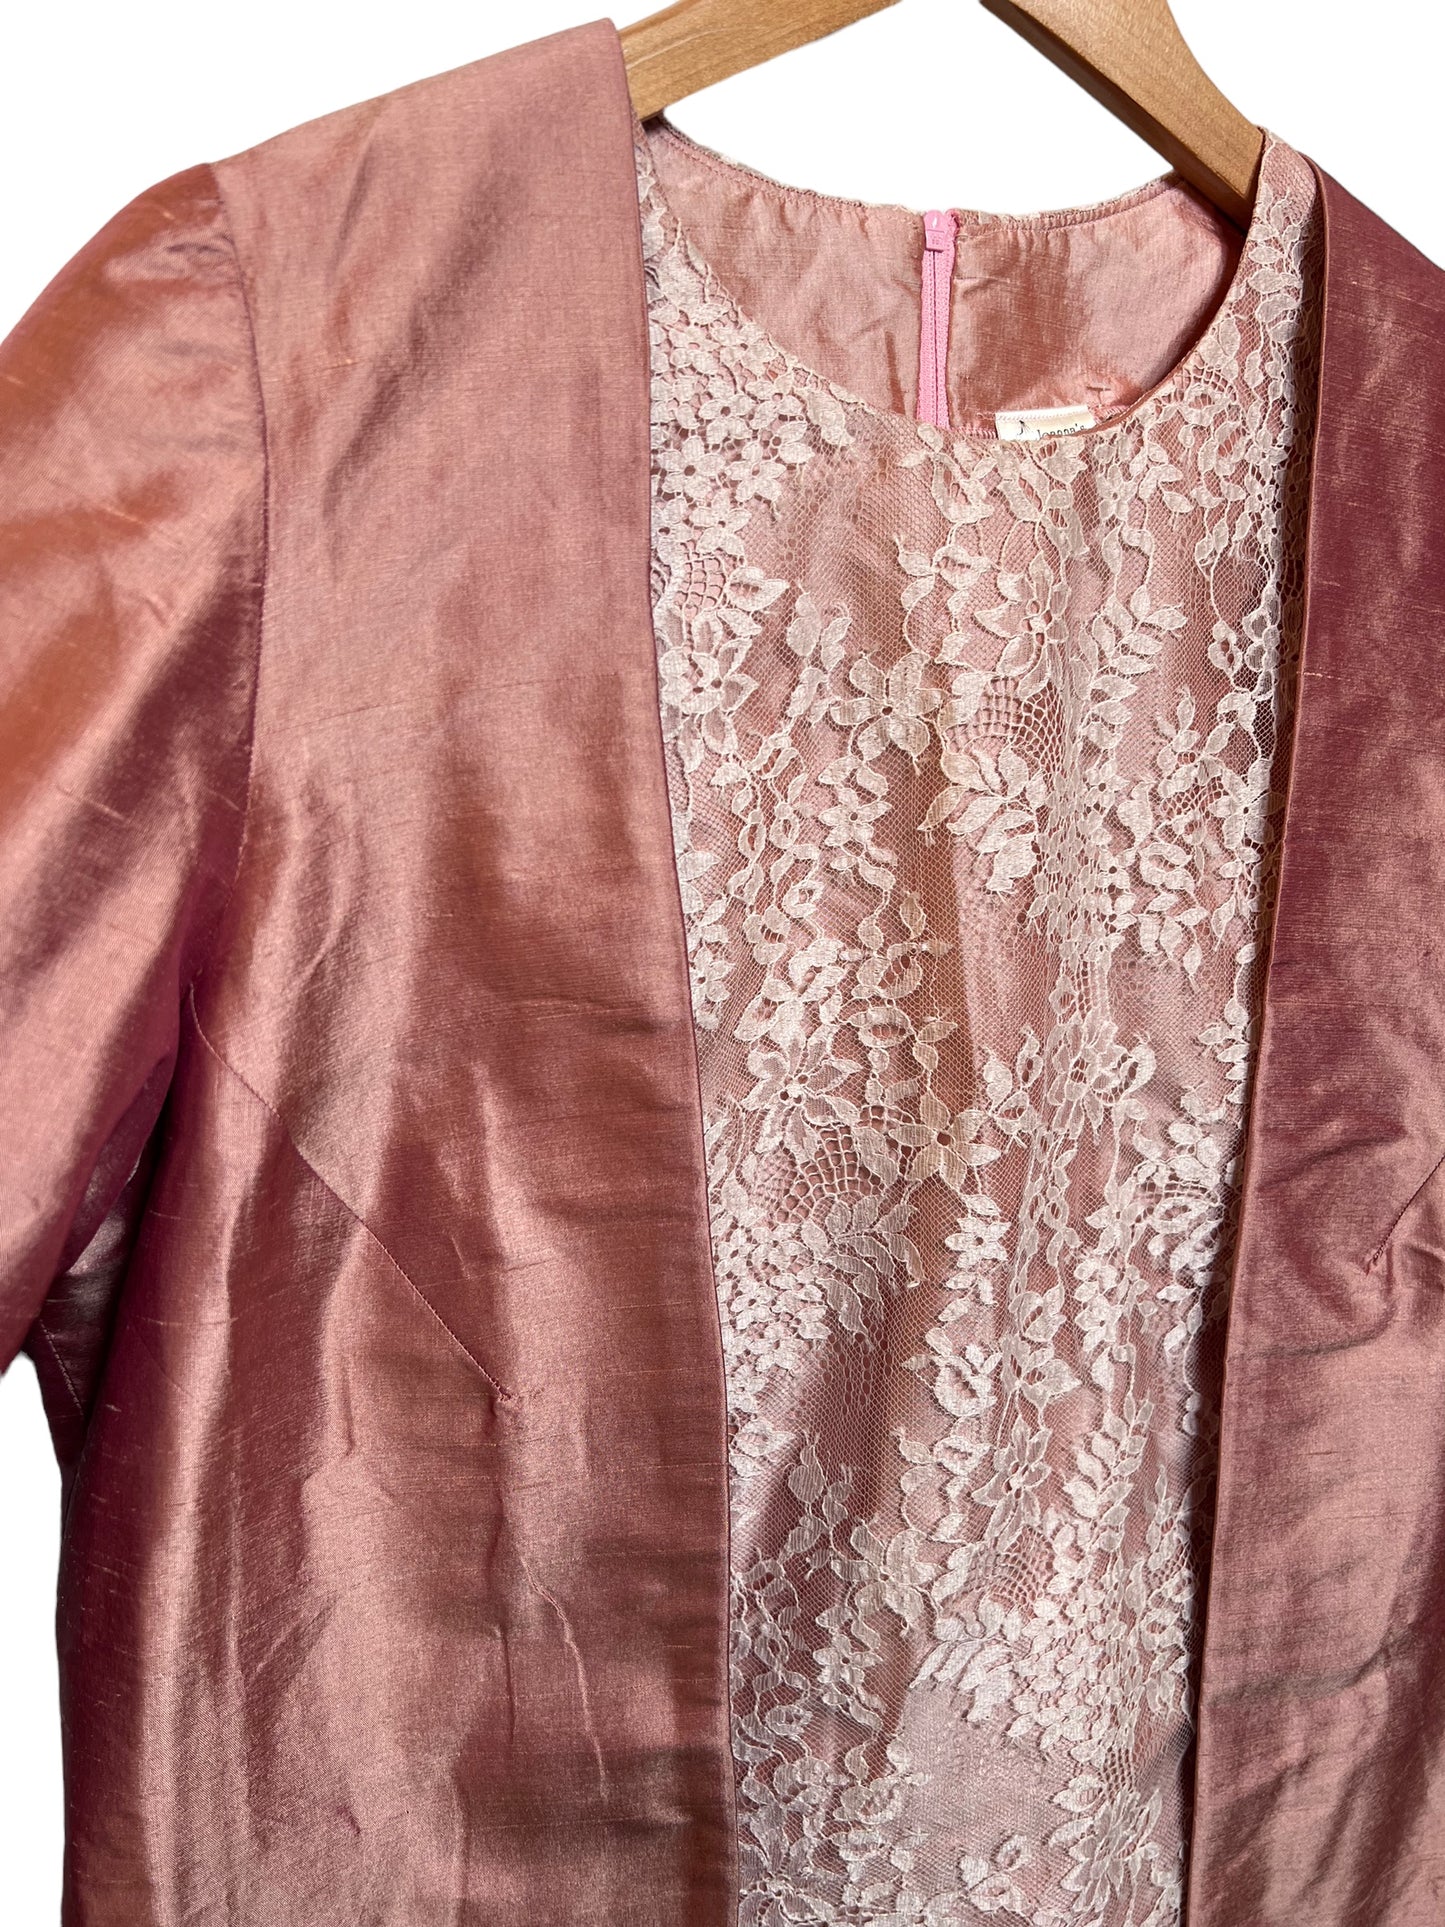 Joanna’s Bridal Pink Jacket with Flowery White Pink Top Set (Size XL)